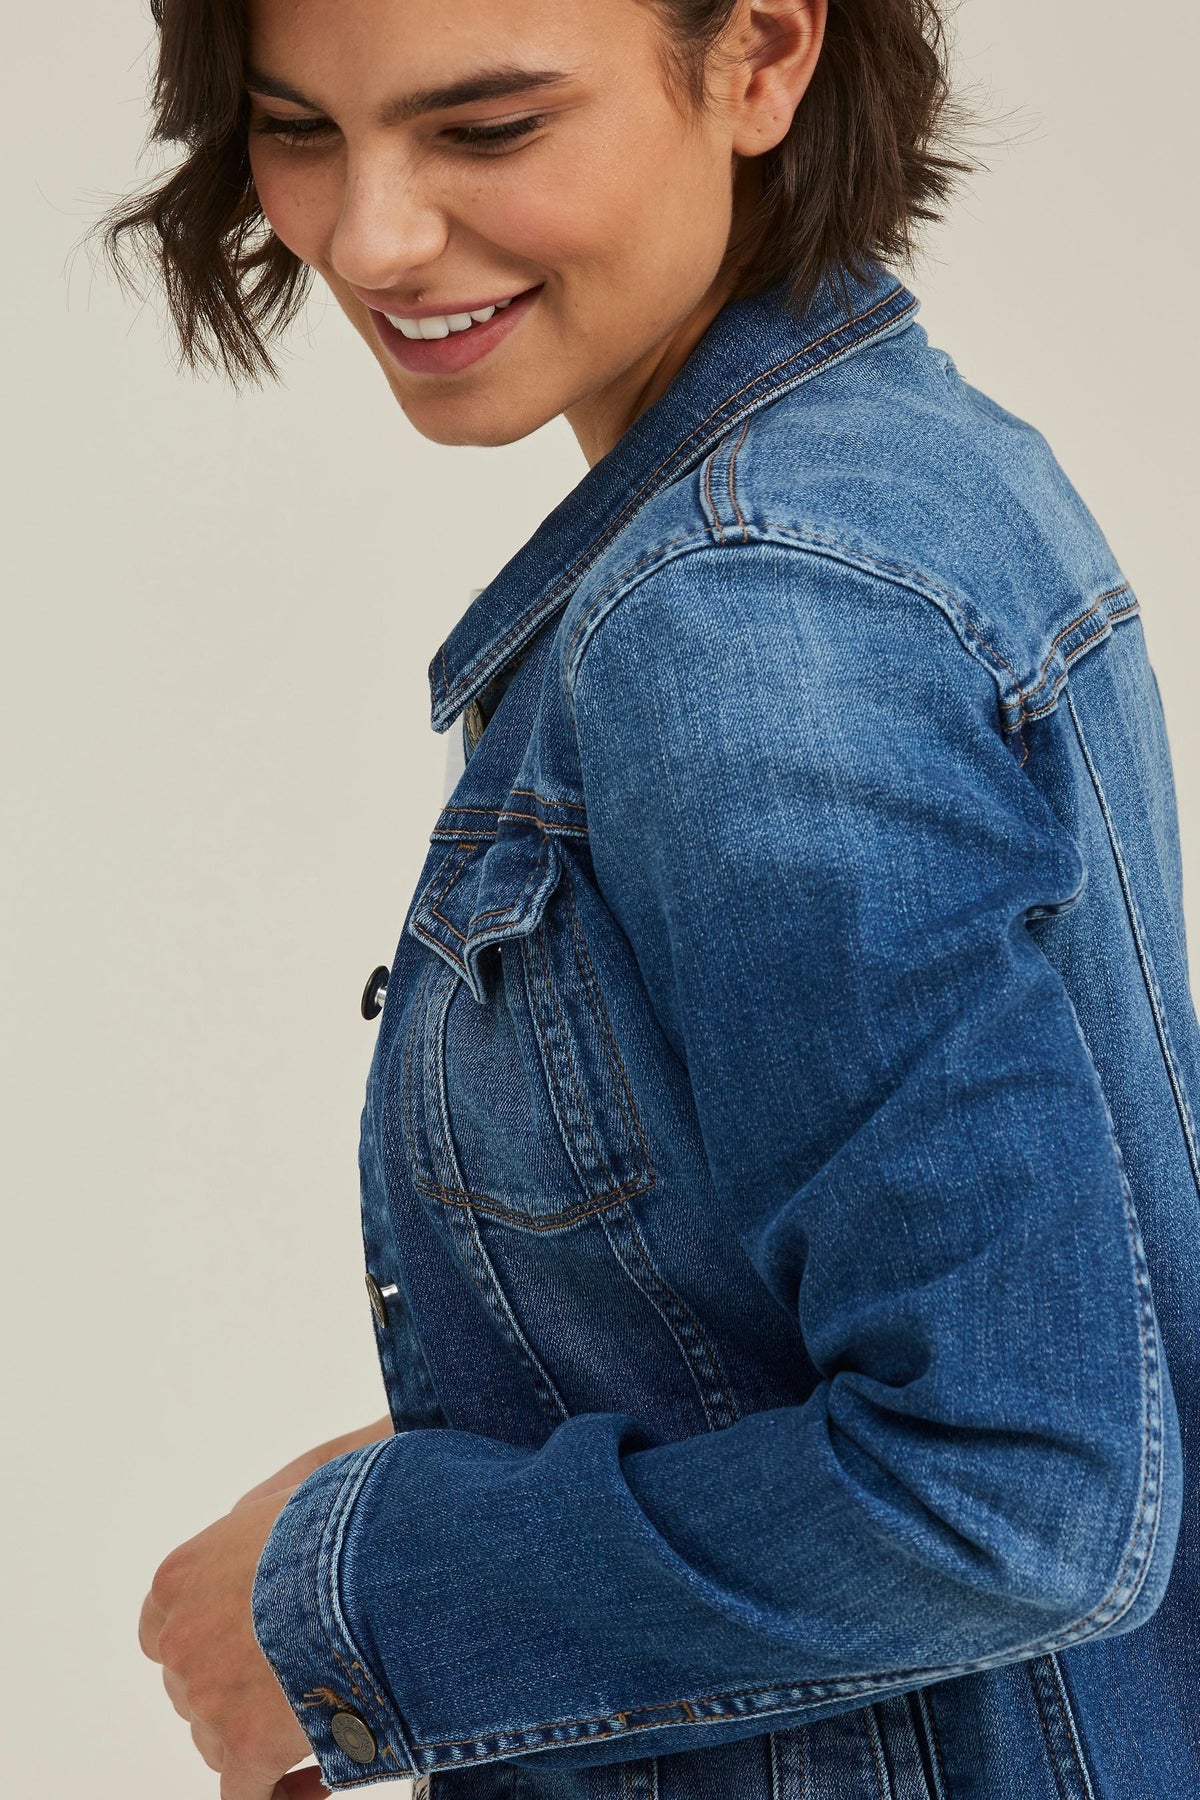 Blue denim jacket for stylish women, featuring a crop cut and bold buttons for a fashionable look.